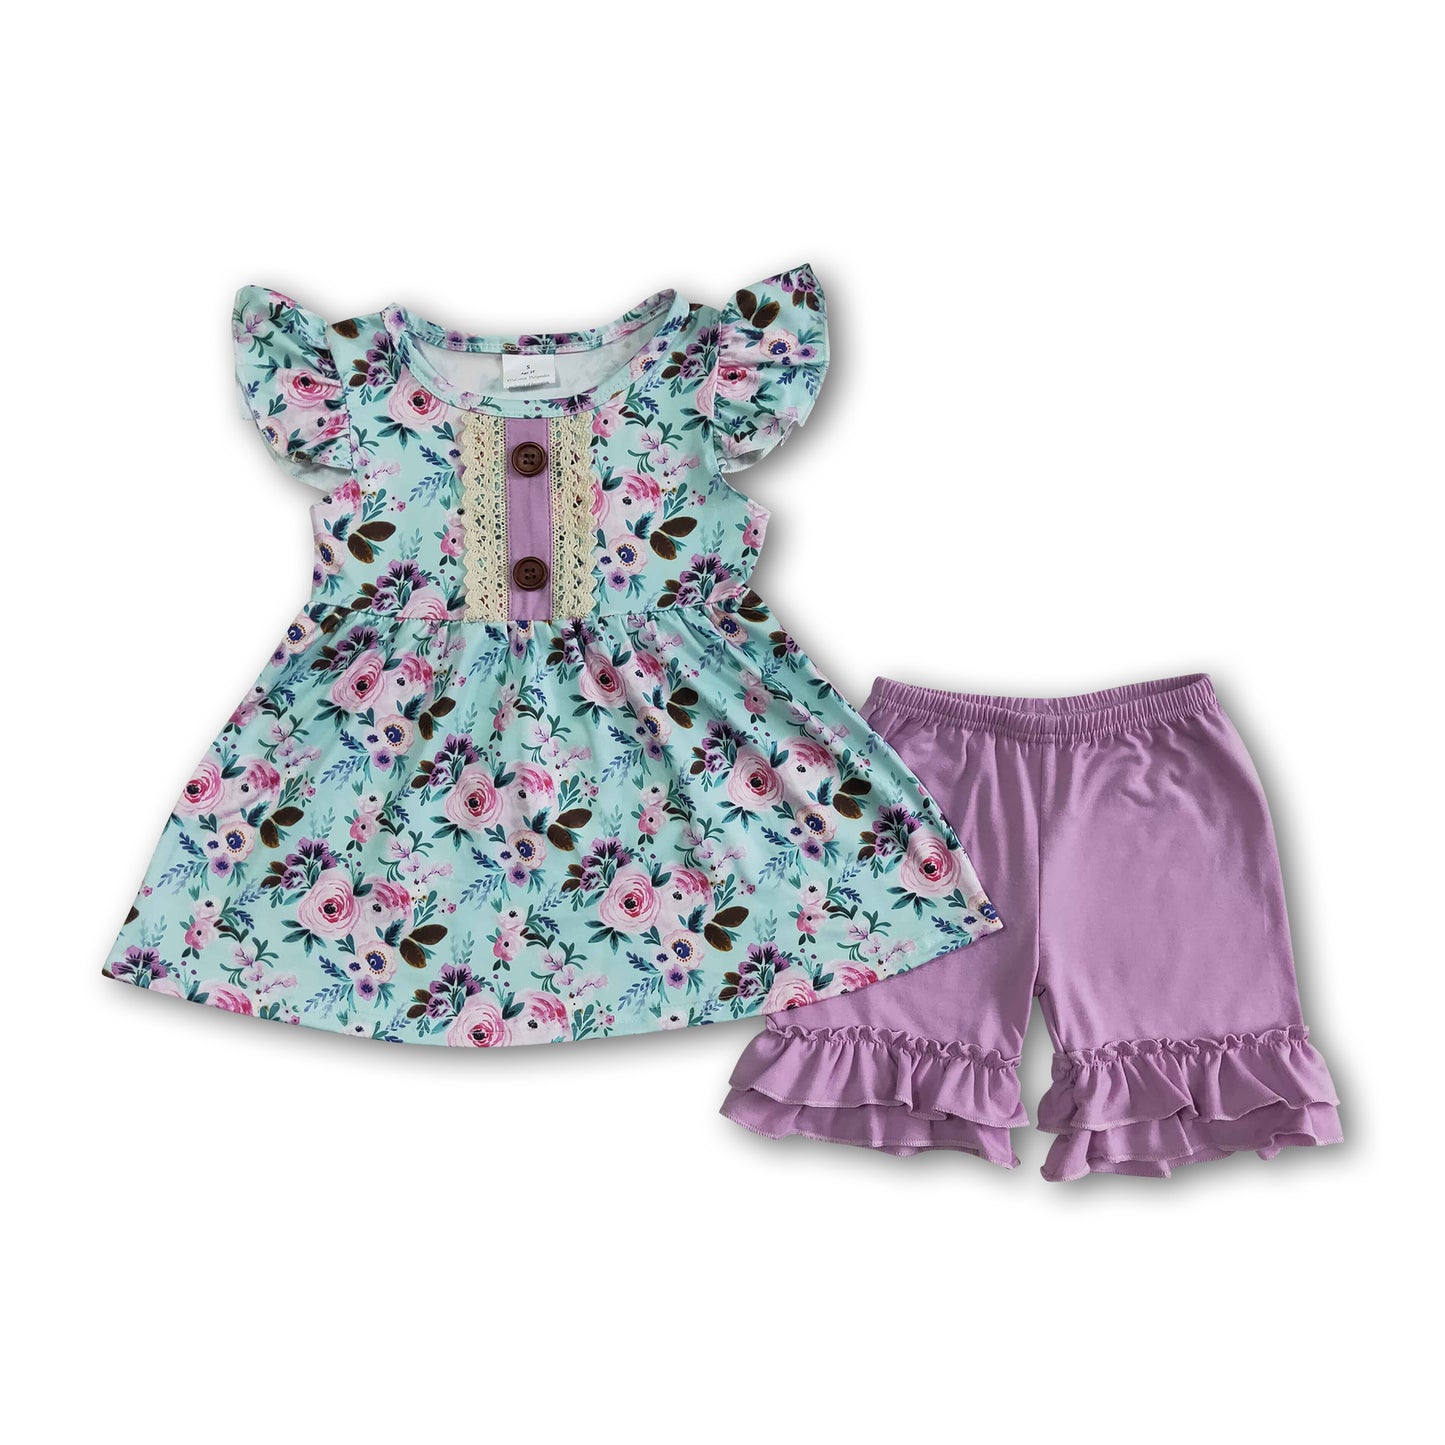 Floral tunic lavender ruffle shorts girls outfits